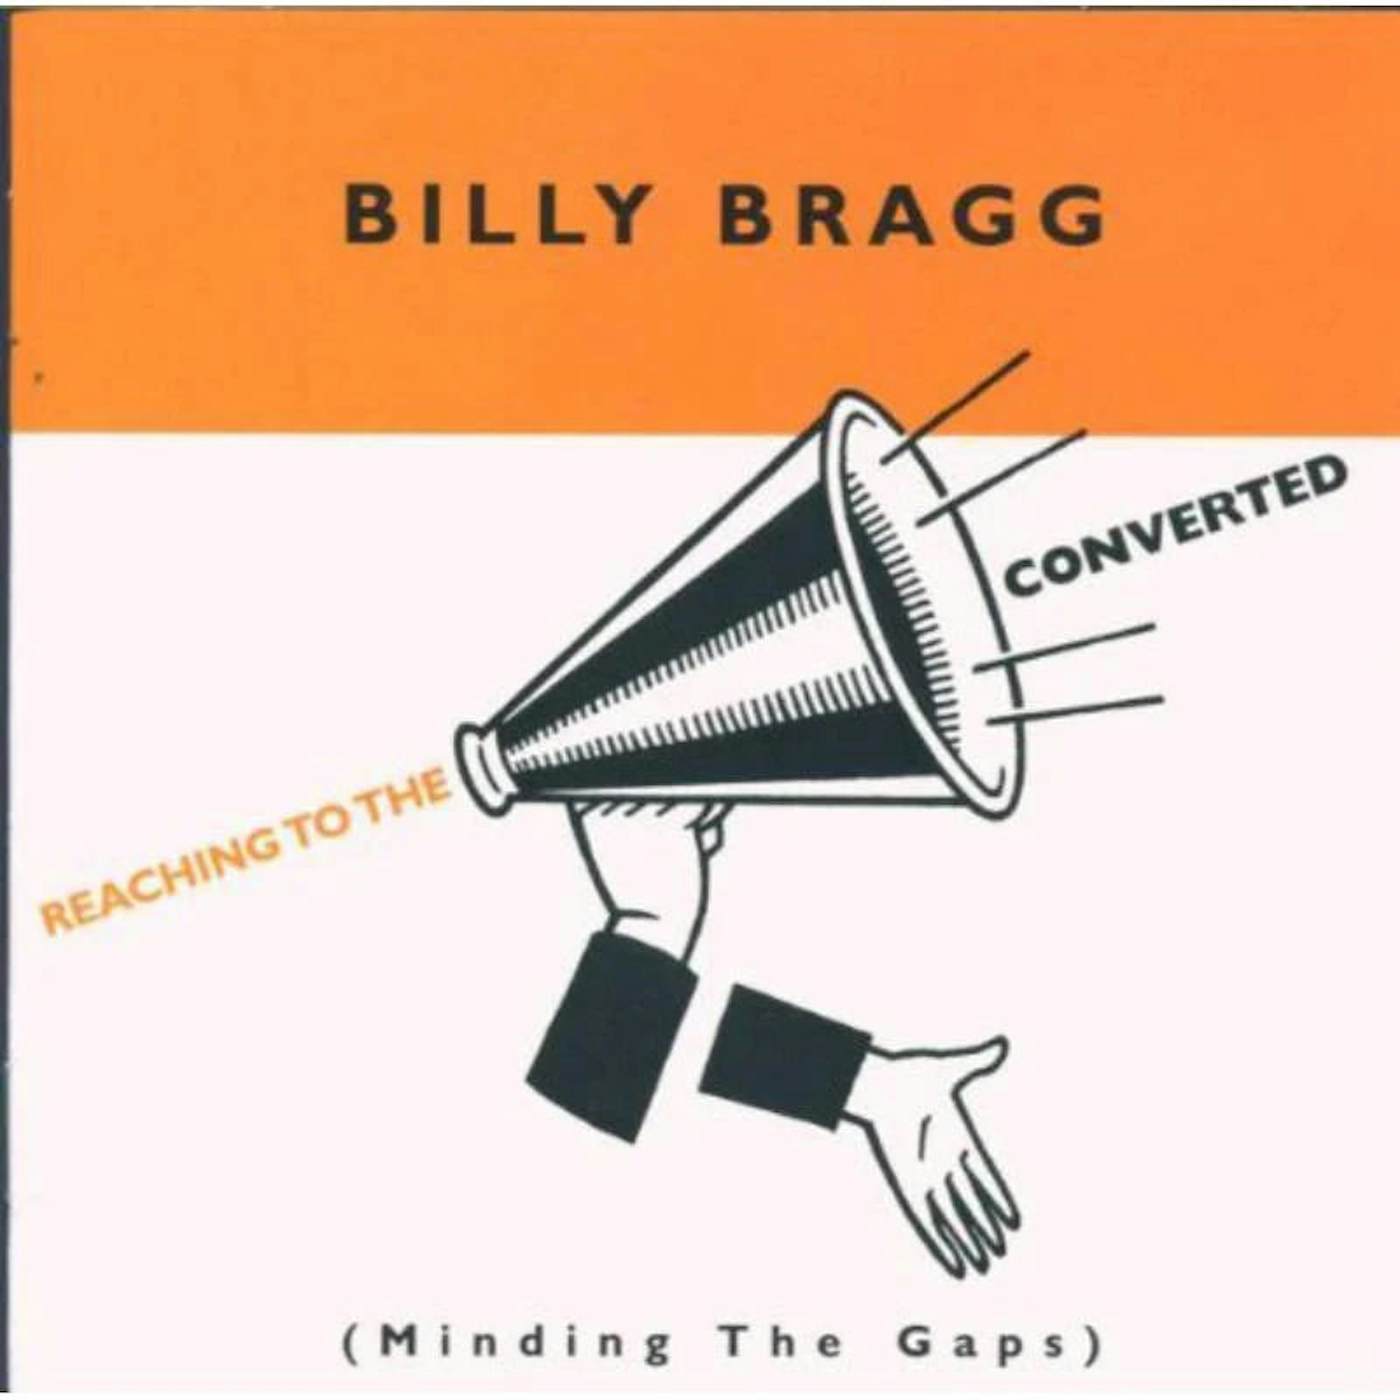 Billy Bragg  CD - Reaching To The Converted